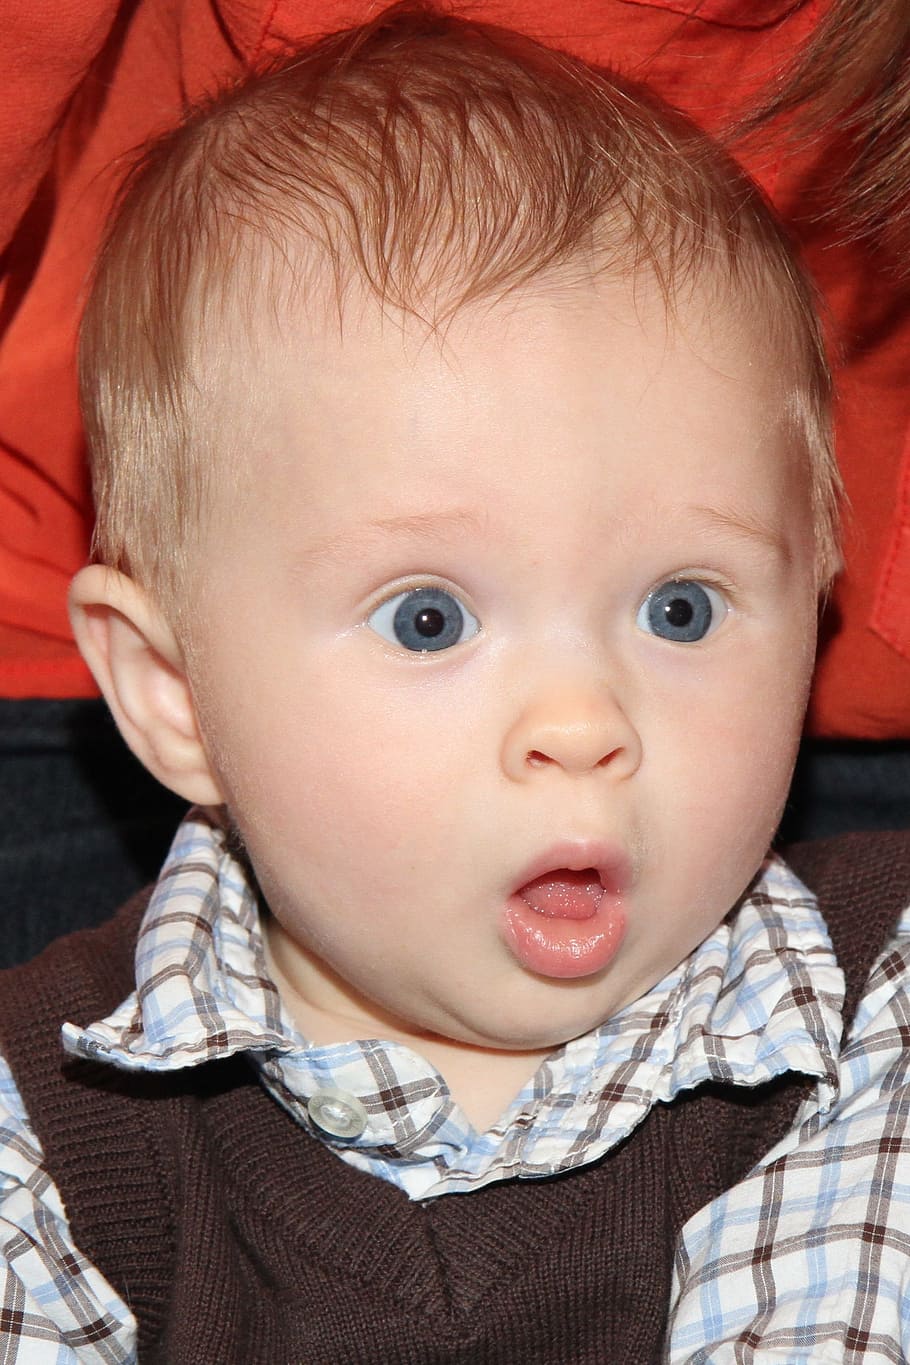 baby reacting shock, Baby Boy, Surprise, Expression, Cute, kid, emotion, amazement, baby, child